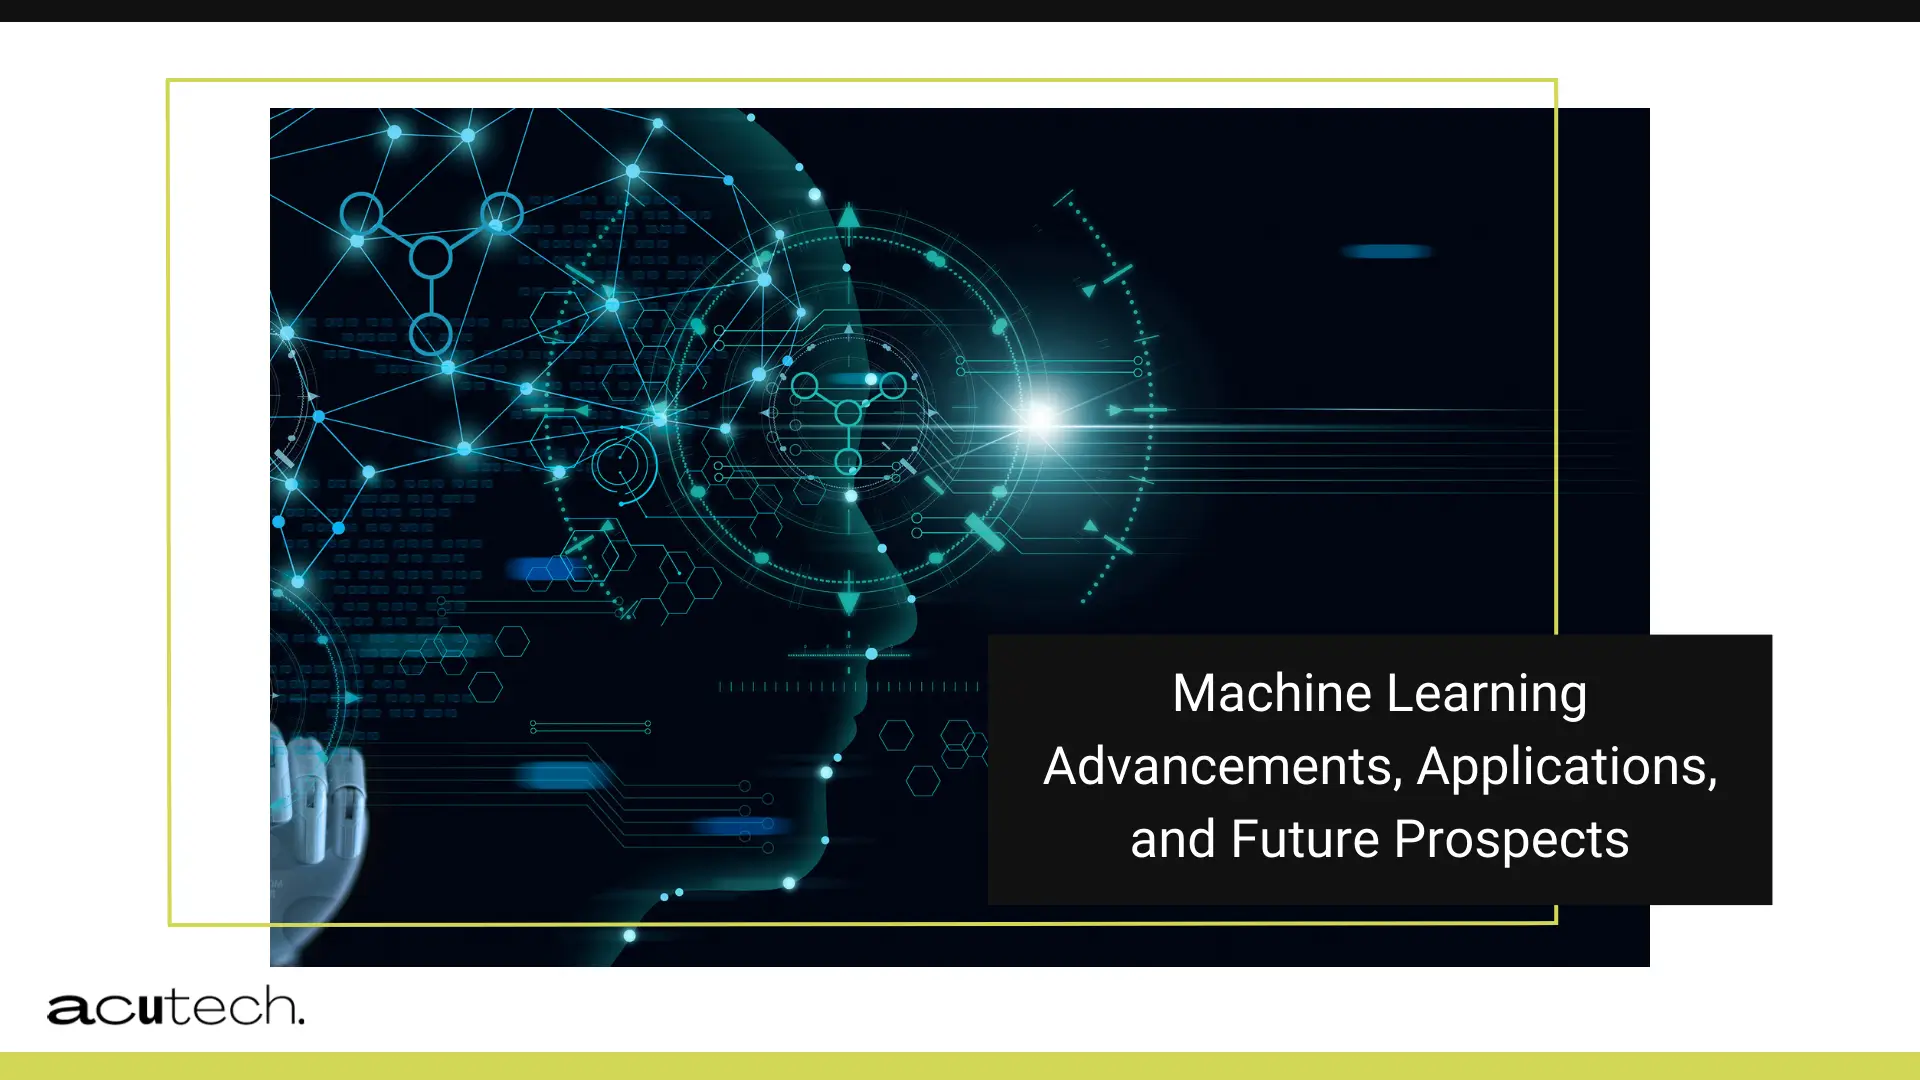 Machine Learning Advancements, Applications, and Future Prospects